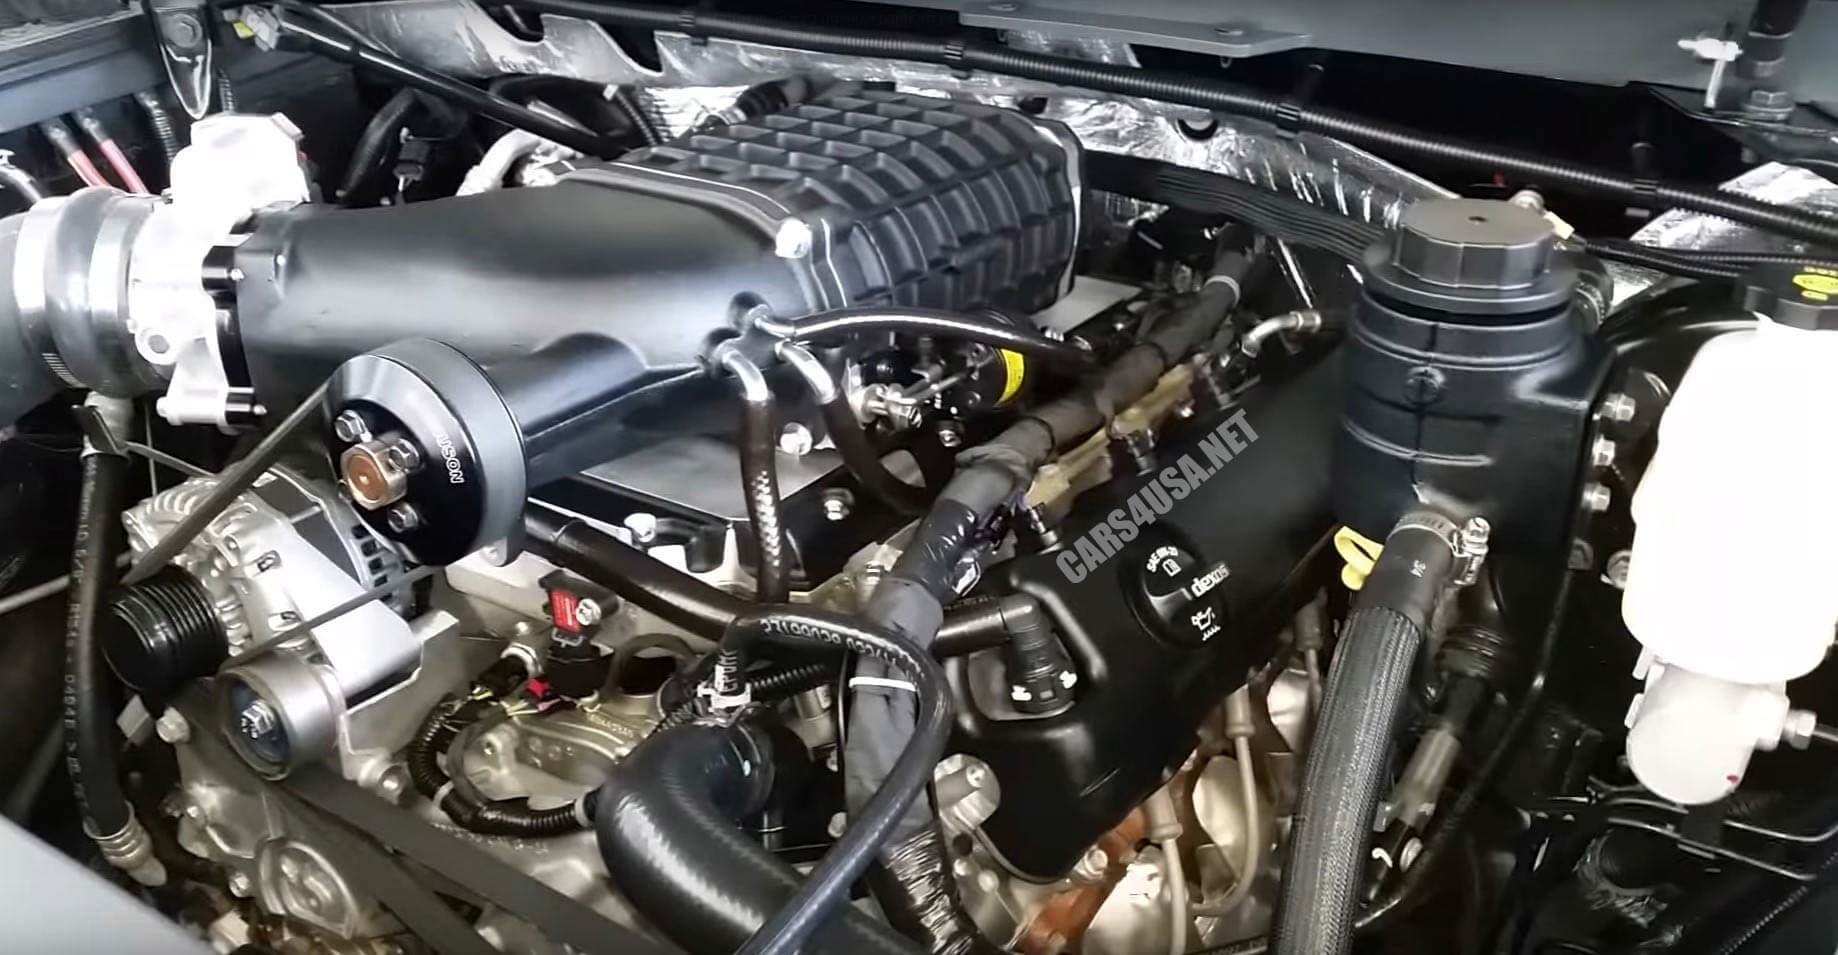 Chevy Reaper Engine